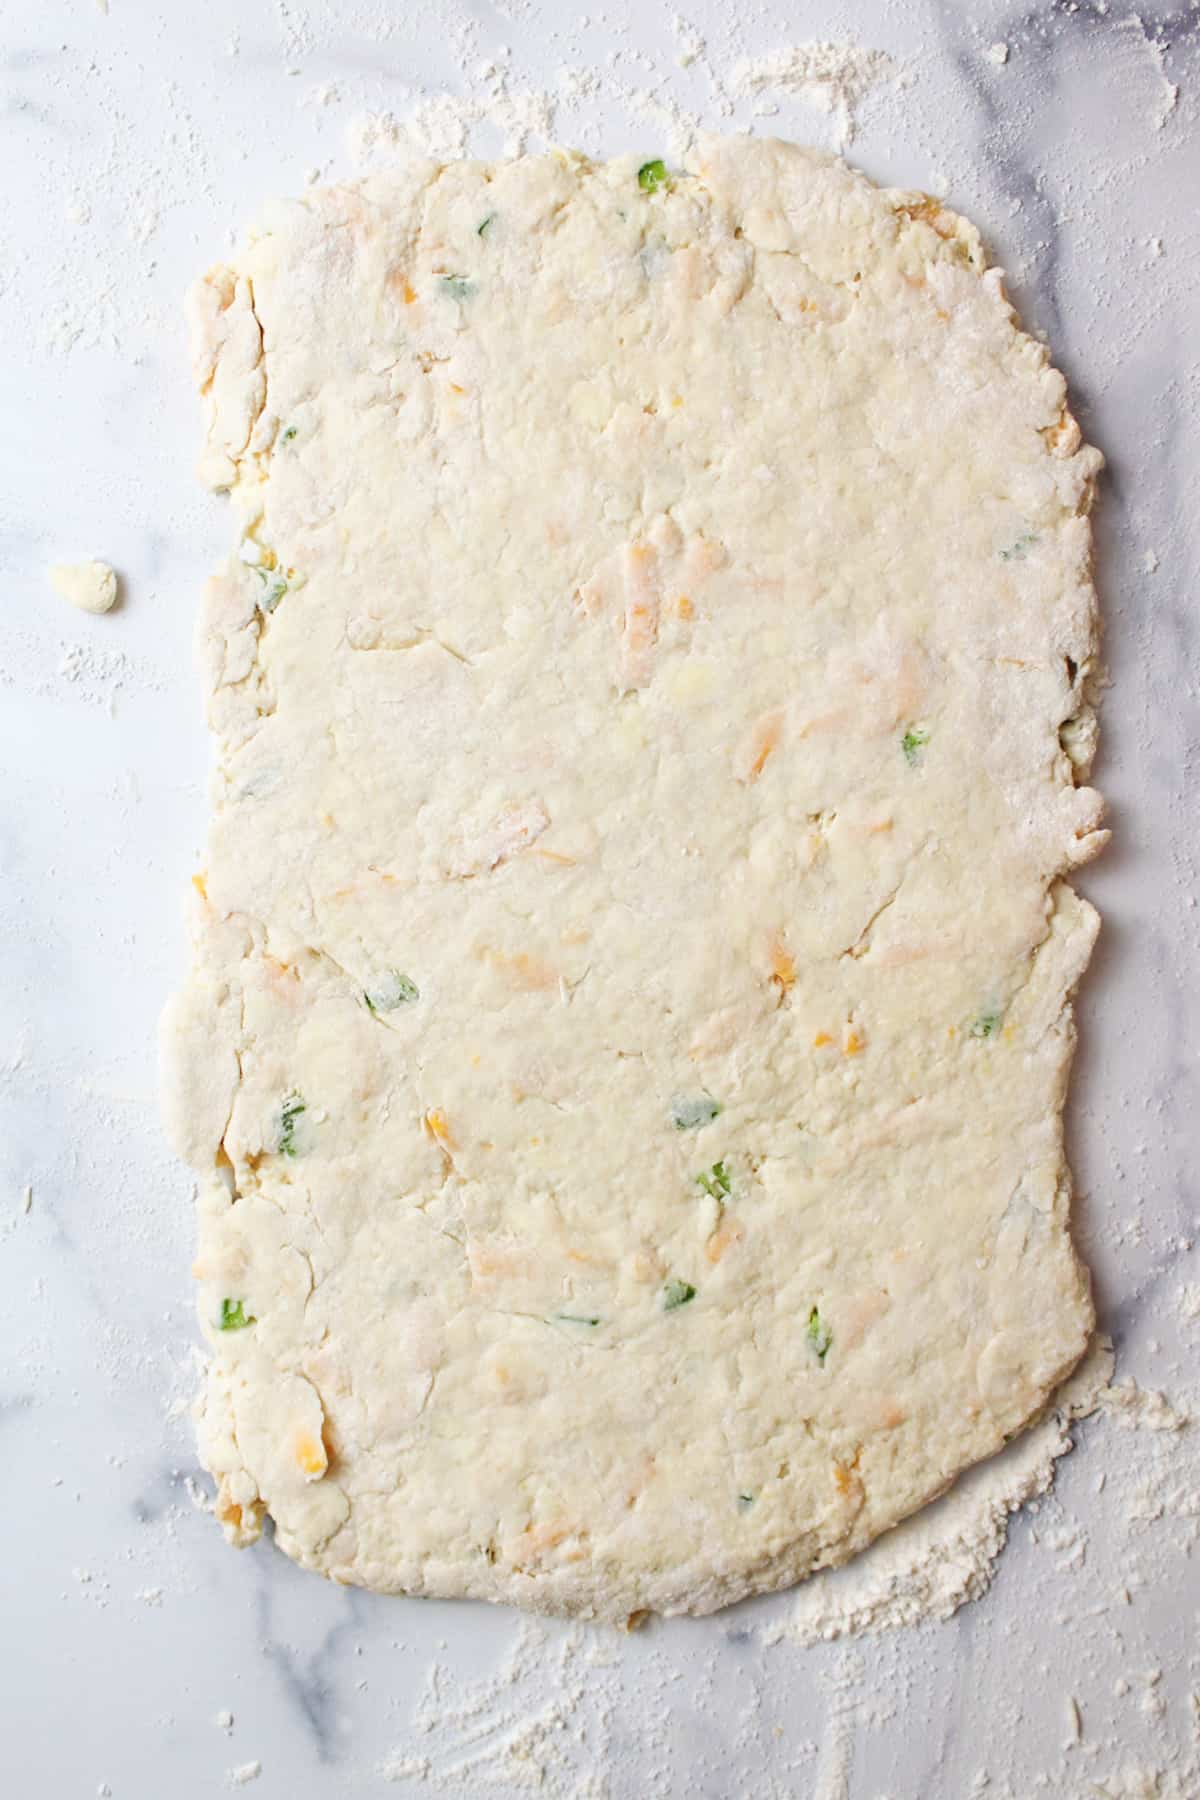 rolled rectangle of Jalapeno cheddar biscuit dough